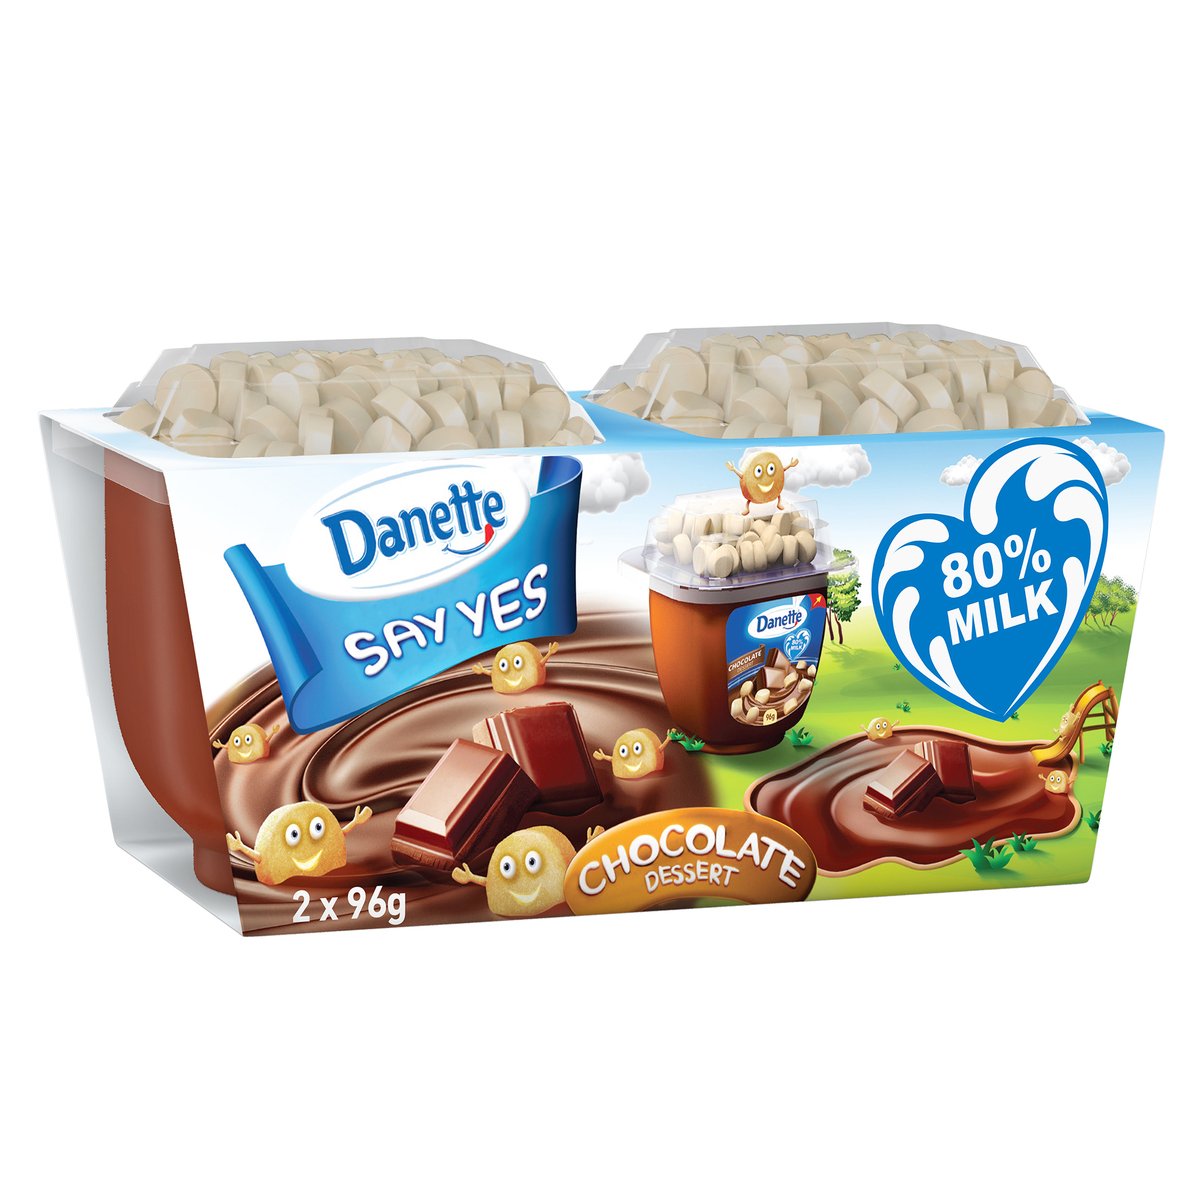 Danette Dessert Chocolate Flavour with Biscuit Topper 2 x 96 g